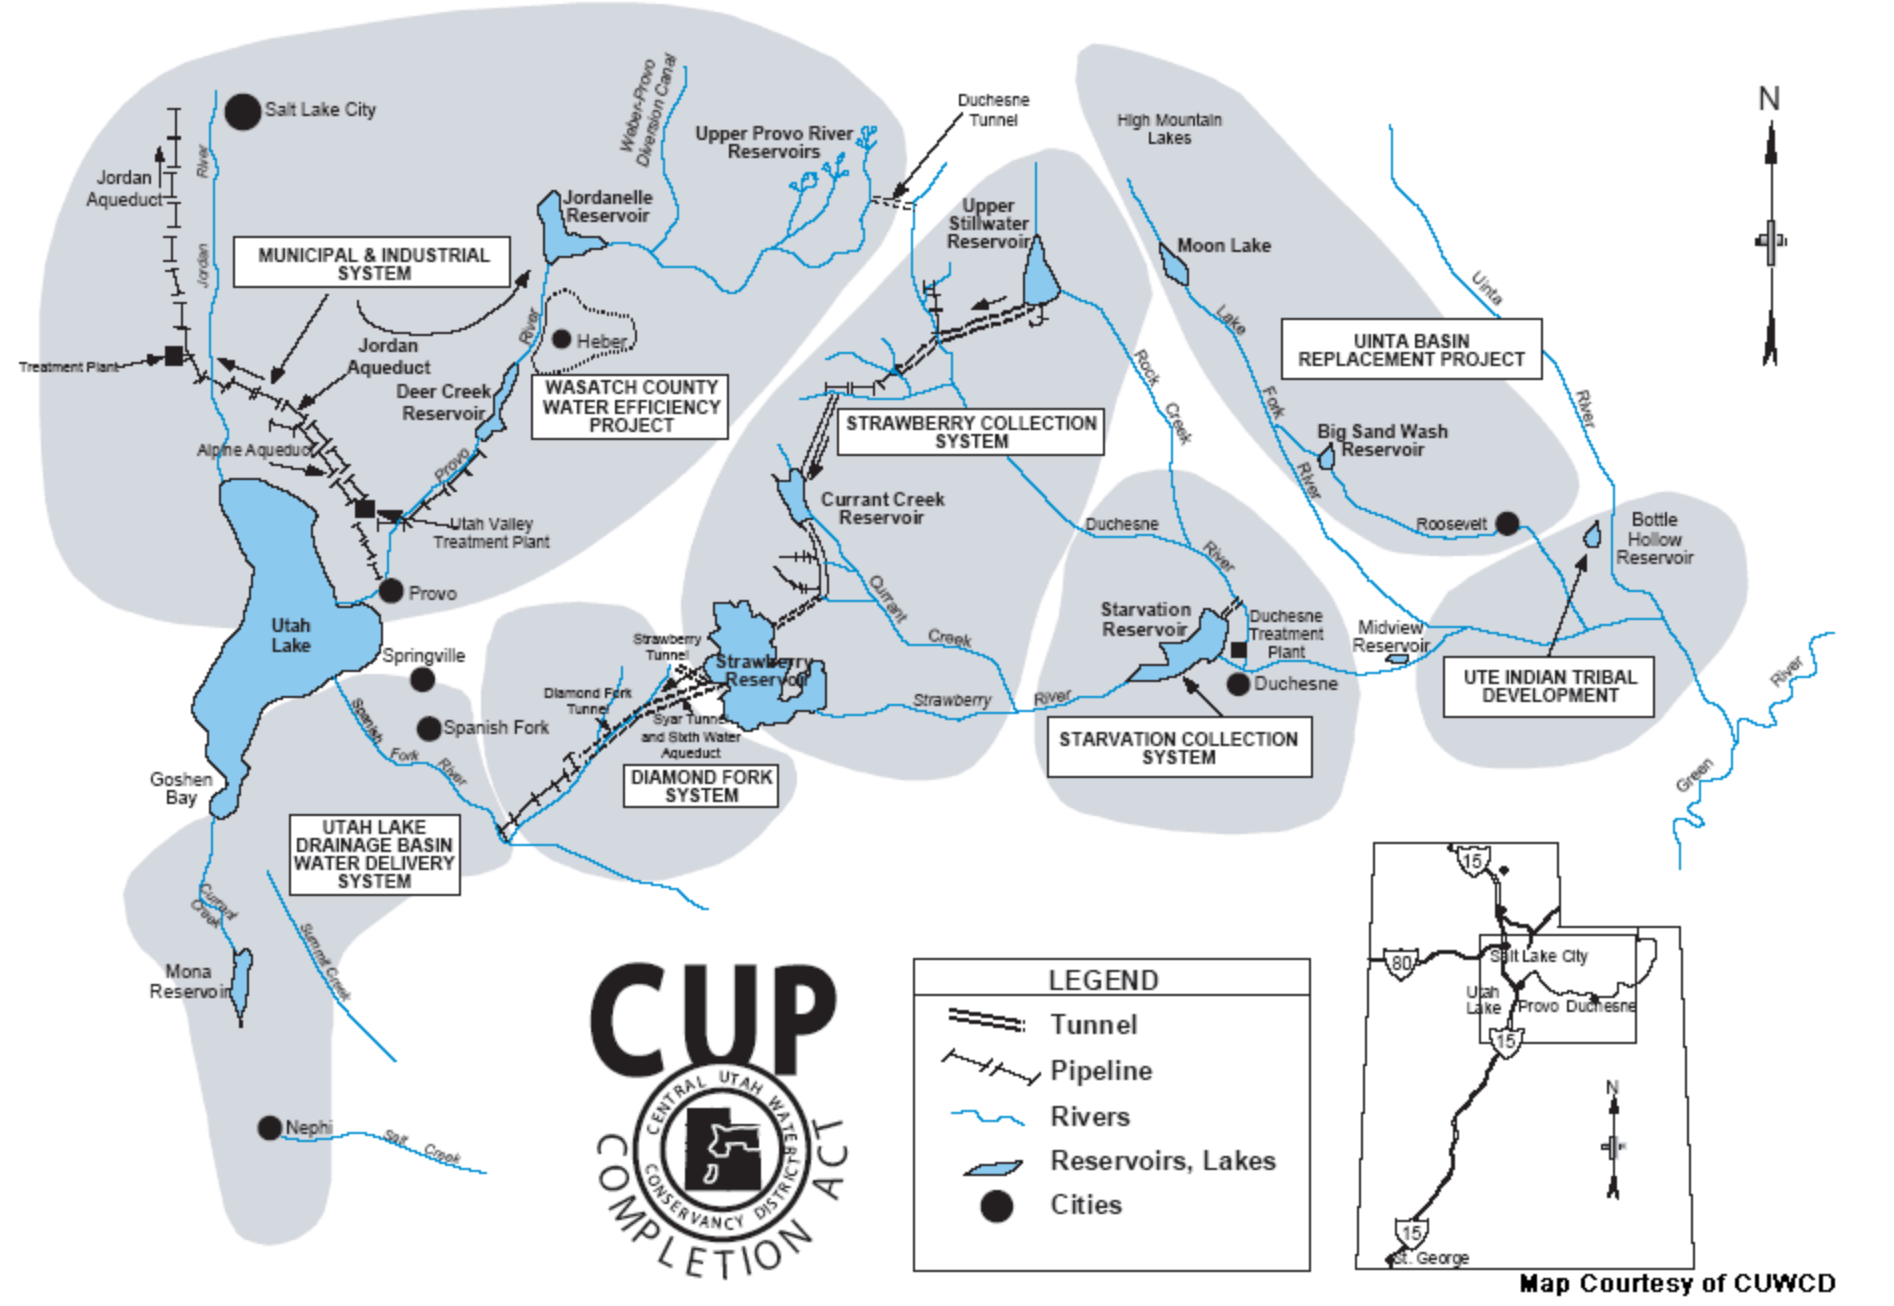 Partial map of the Central Utah Project, relevant to the CUPCA of 1992